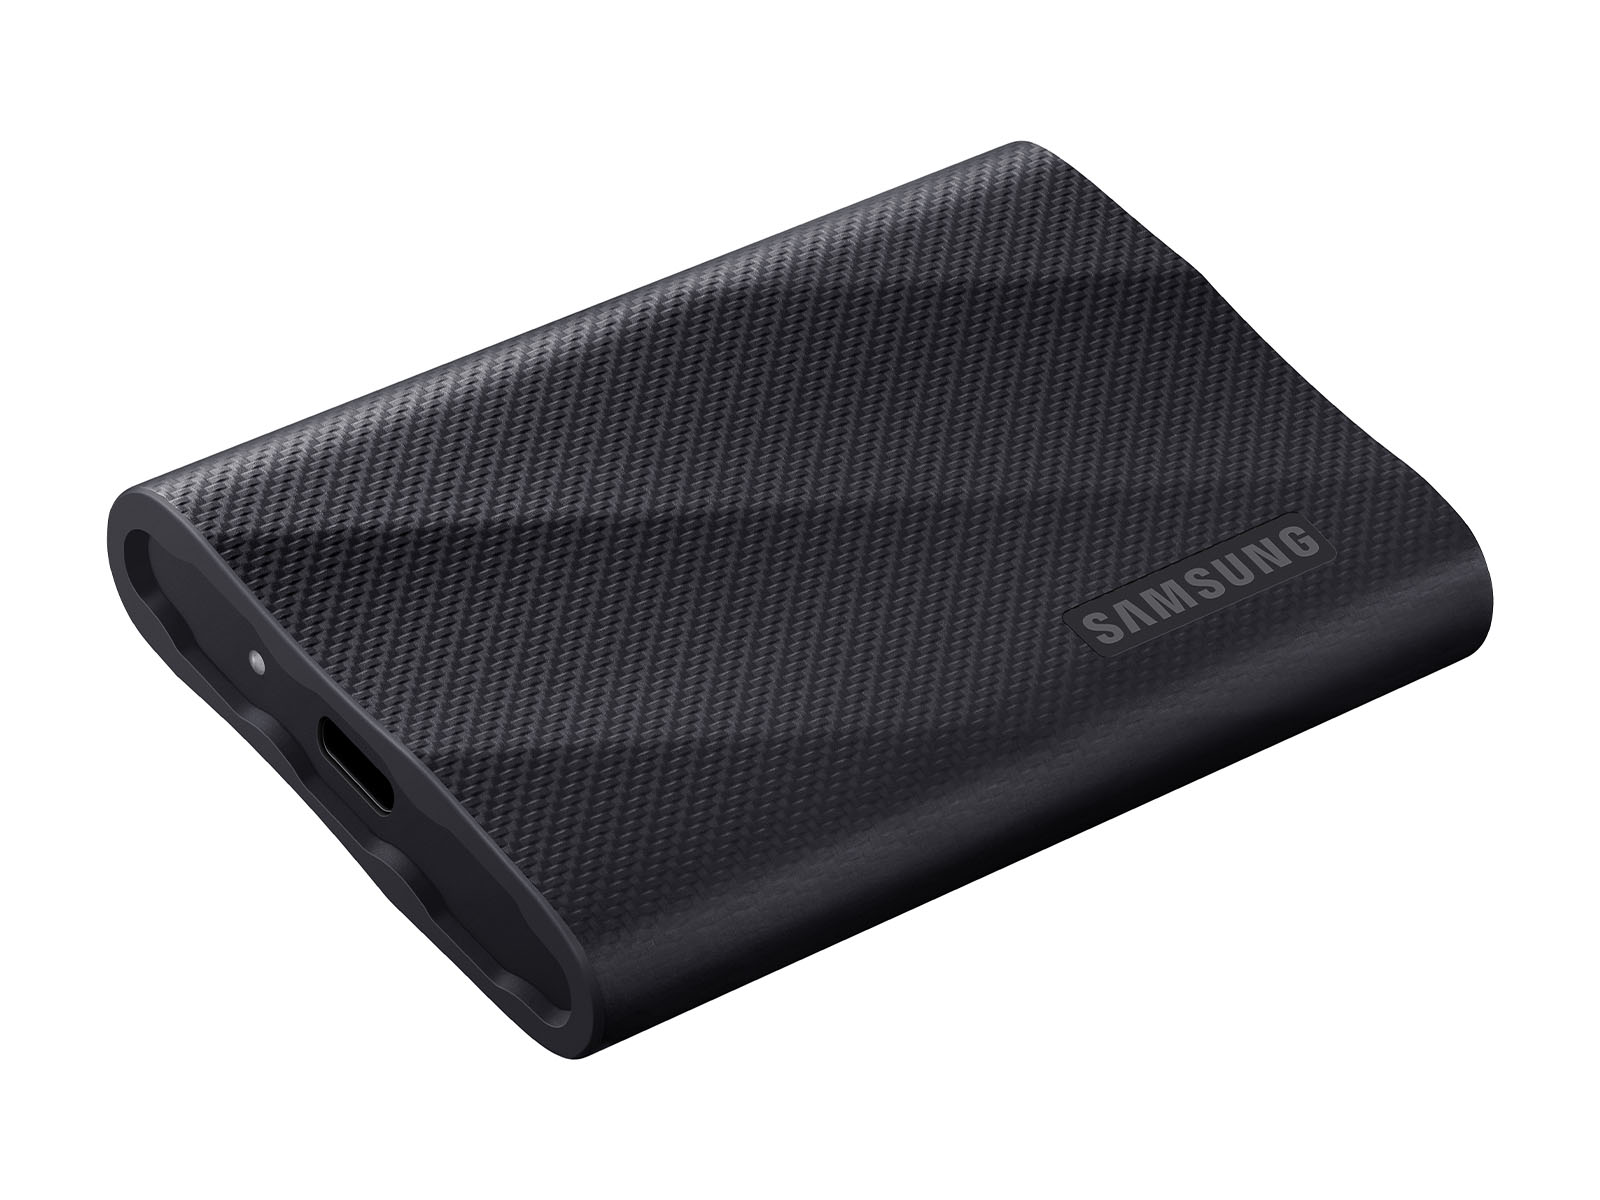 Disque dur externe SAMSUNG Portable SSD T9 USB 3.2 type C 2To